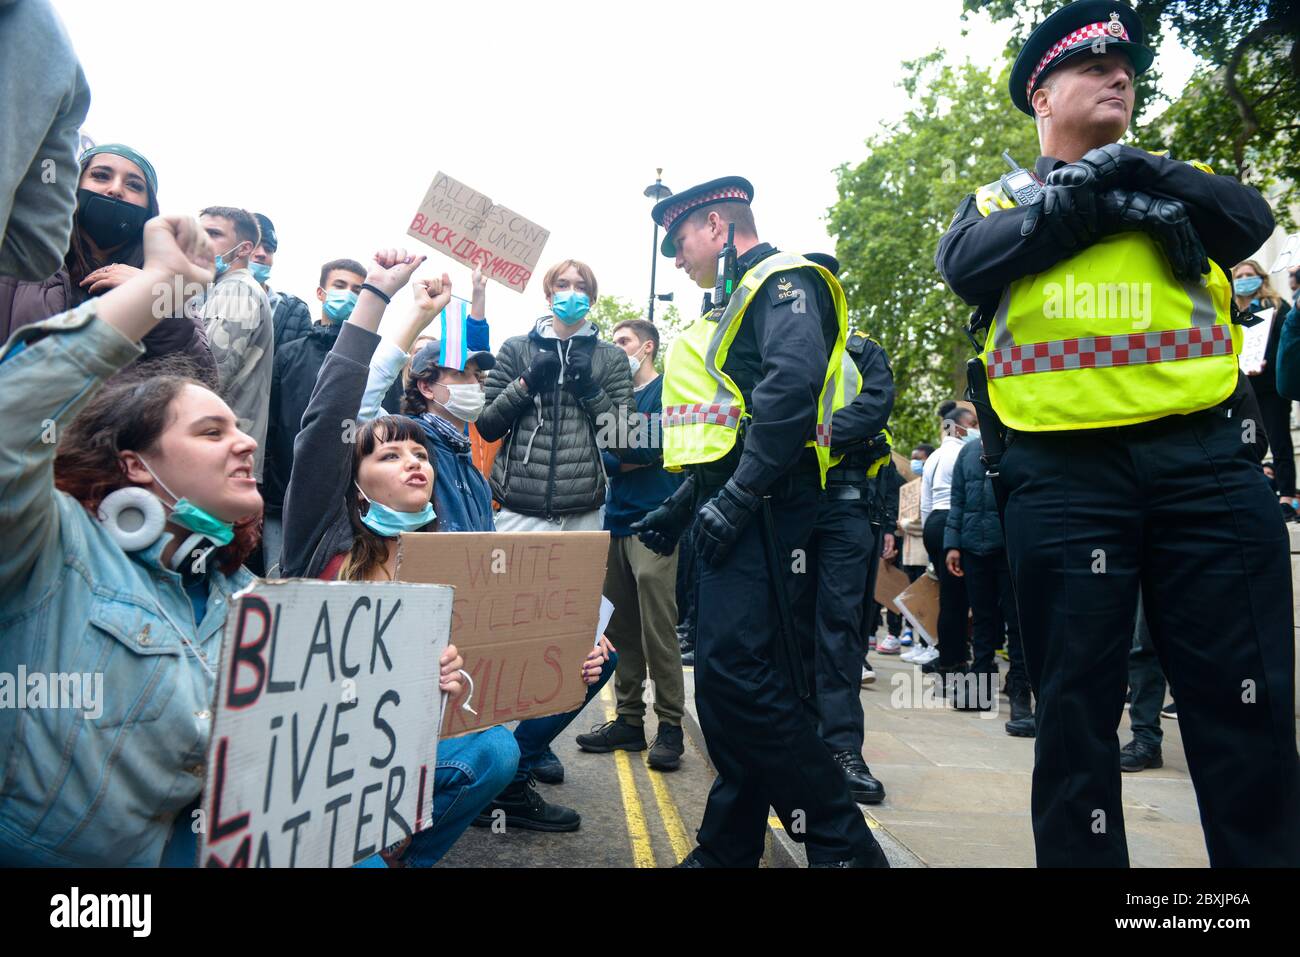 Marching for Black Lives Matter , londres 7 juin 2020, photo Antonio Pagano/Alamy Banque D'Images